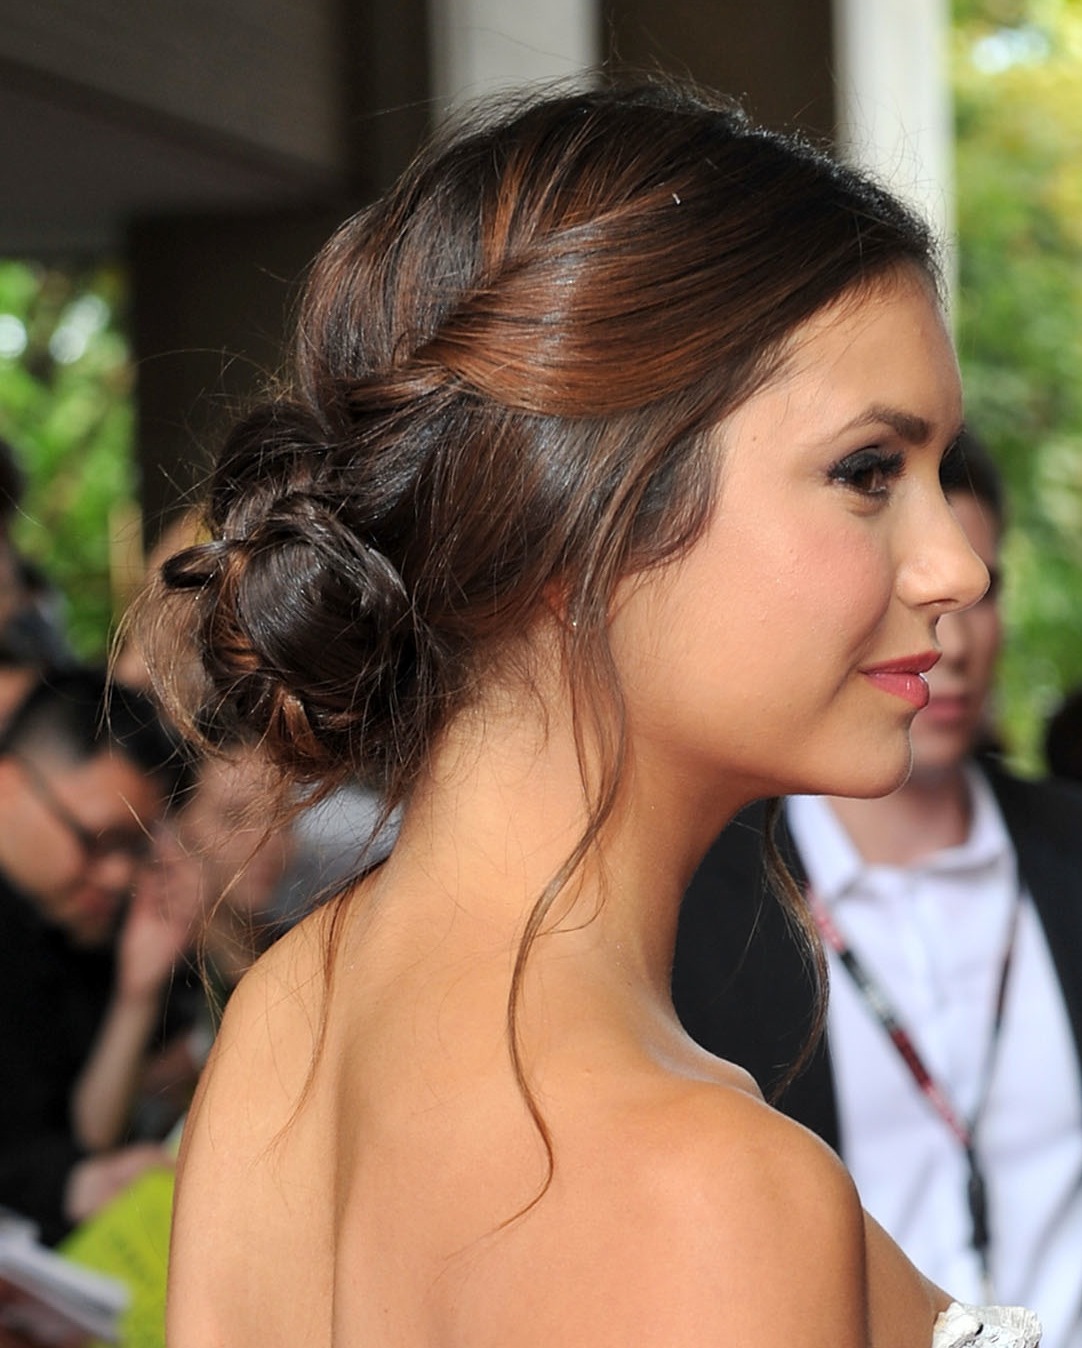 Prom Updo Hairstyles